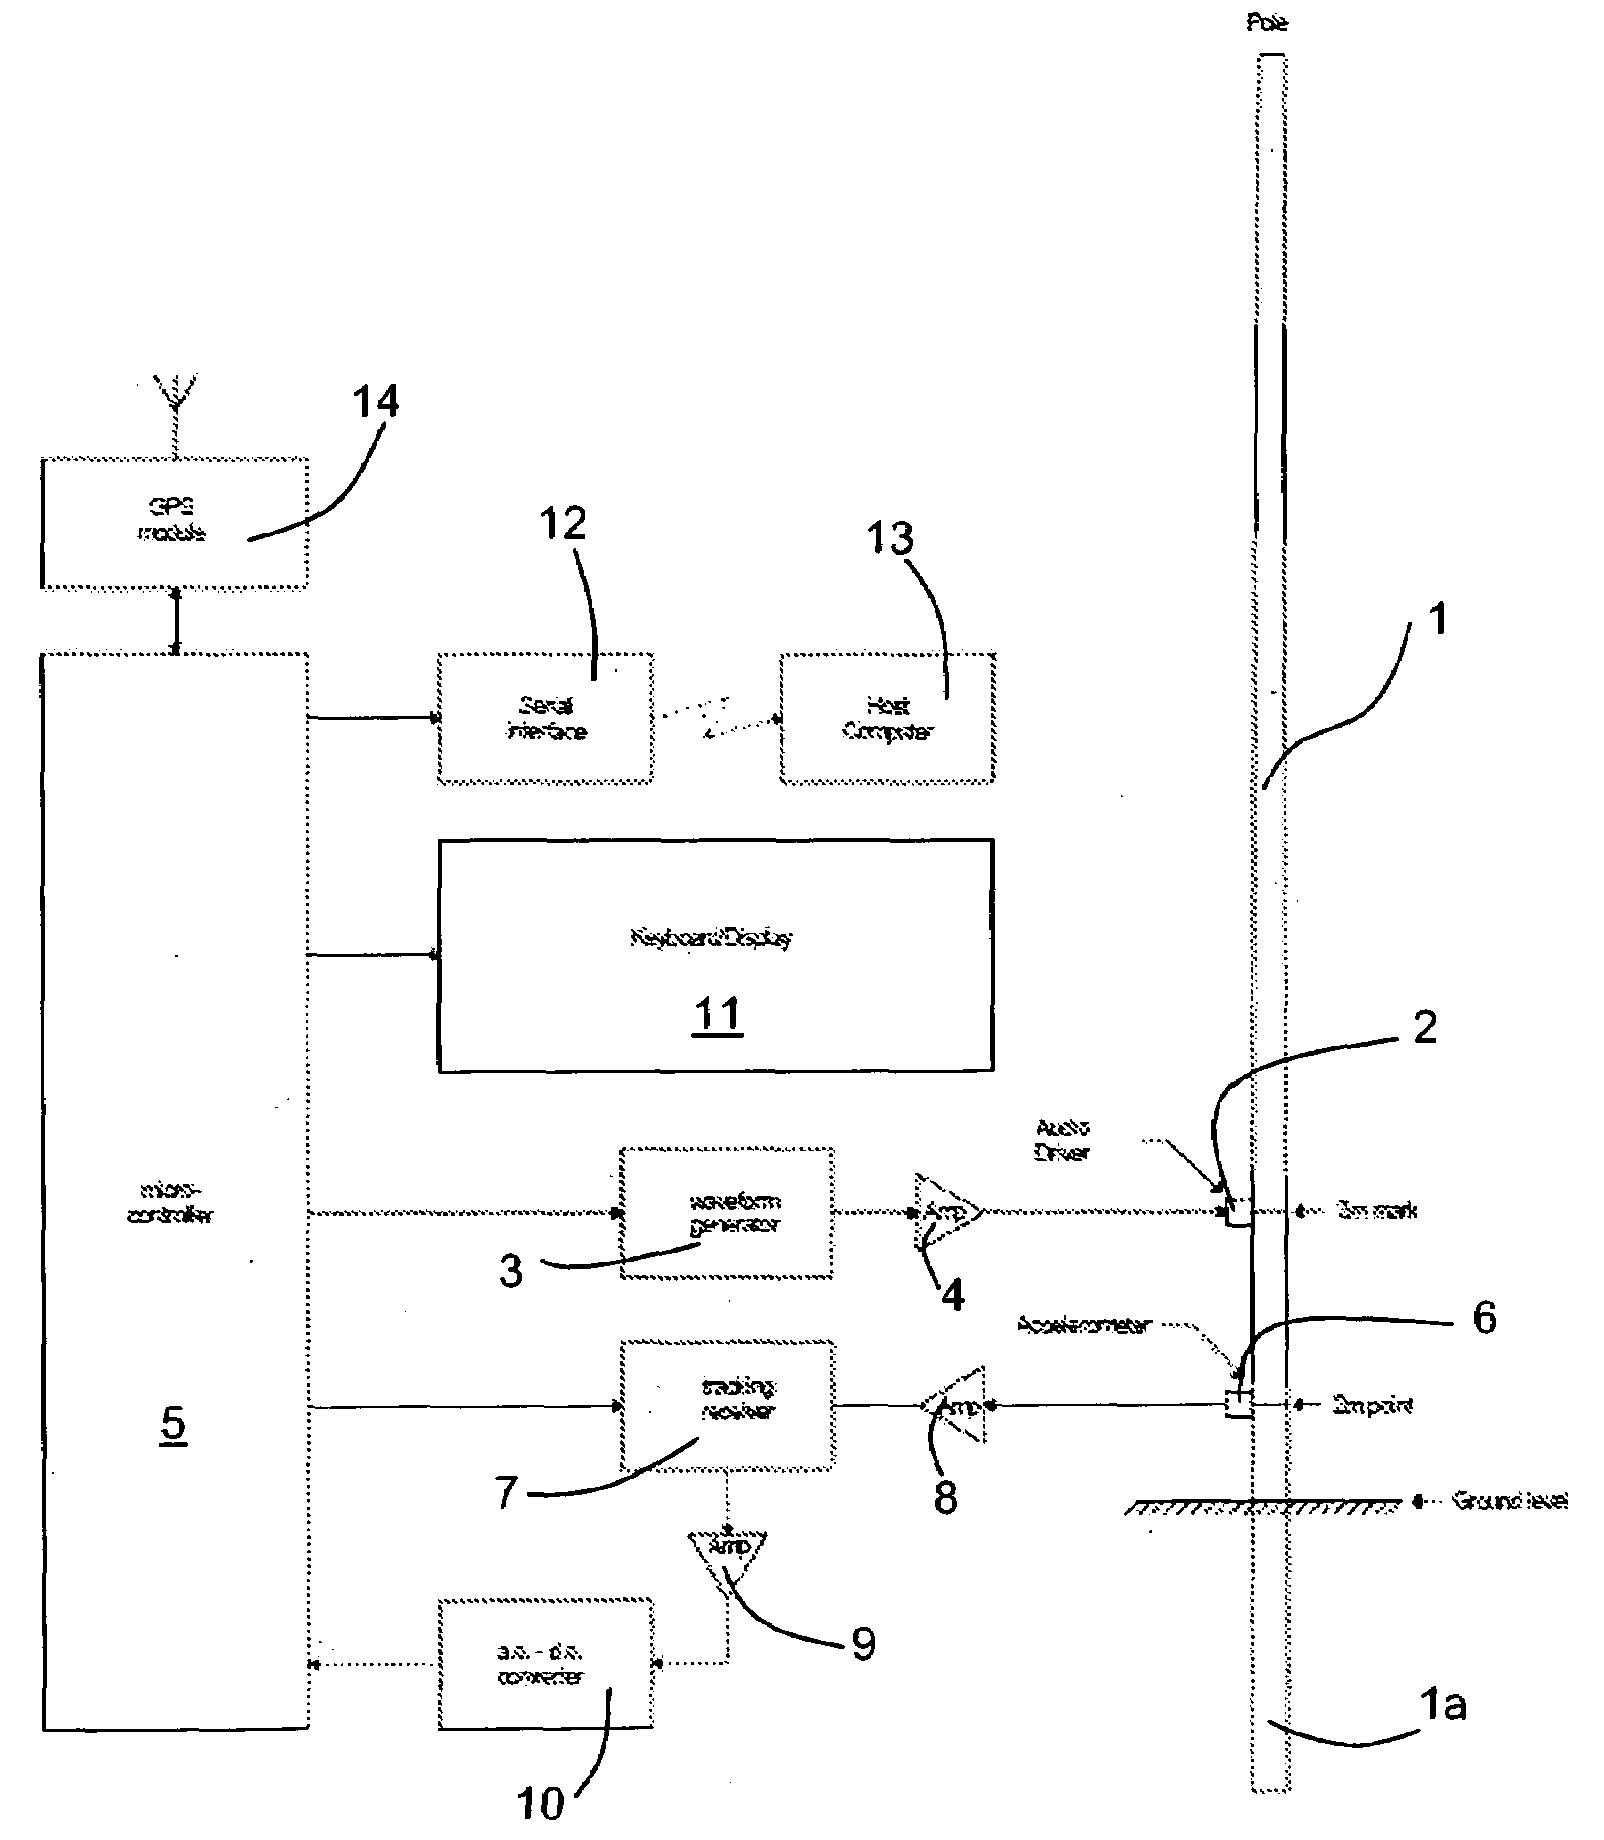 Method of and apparatus for testing wooden poles